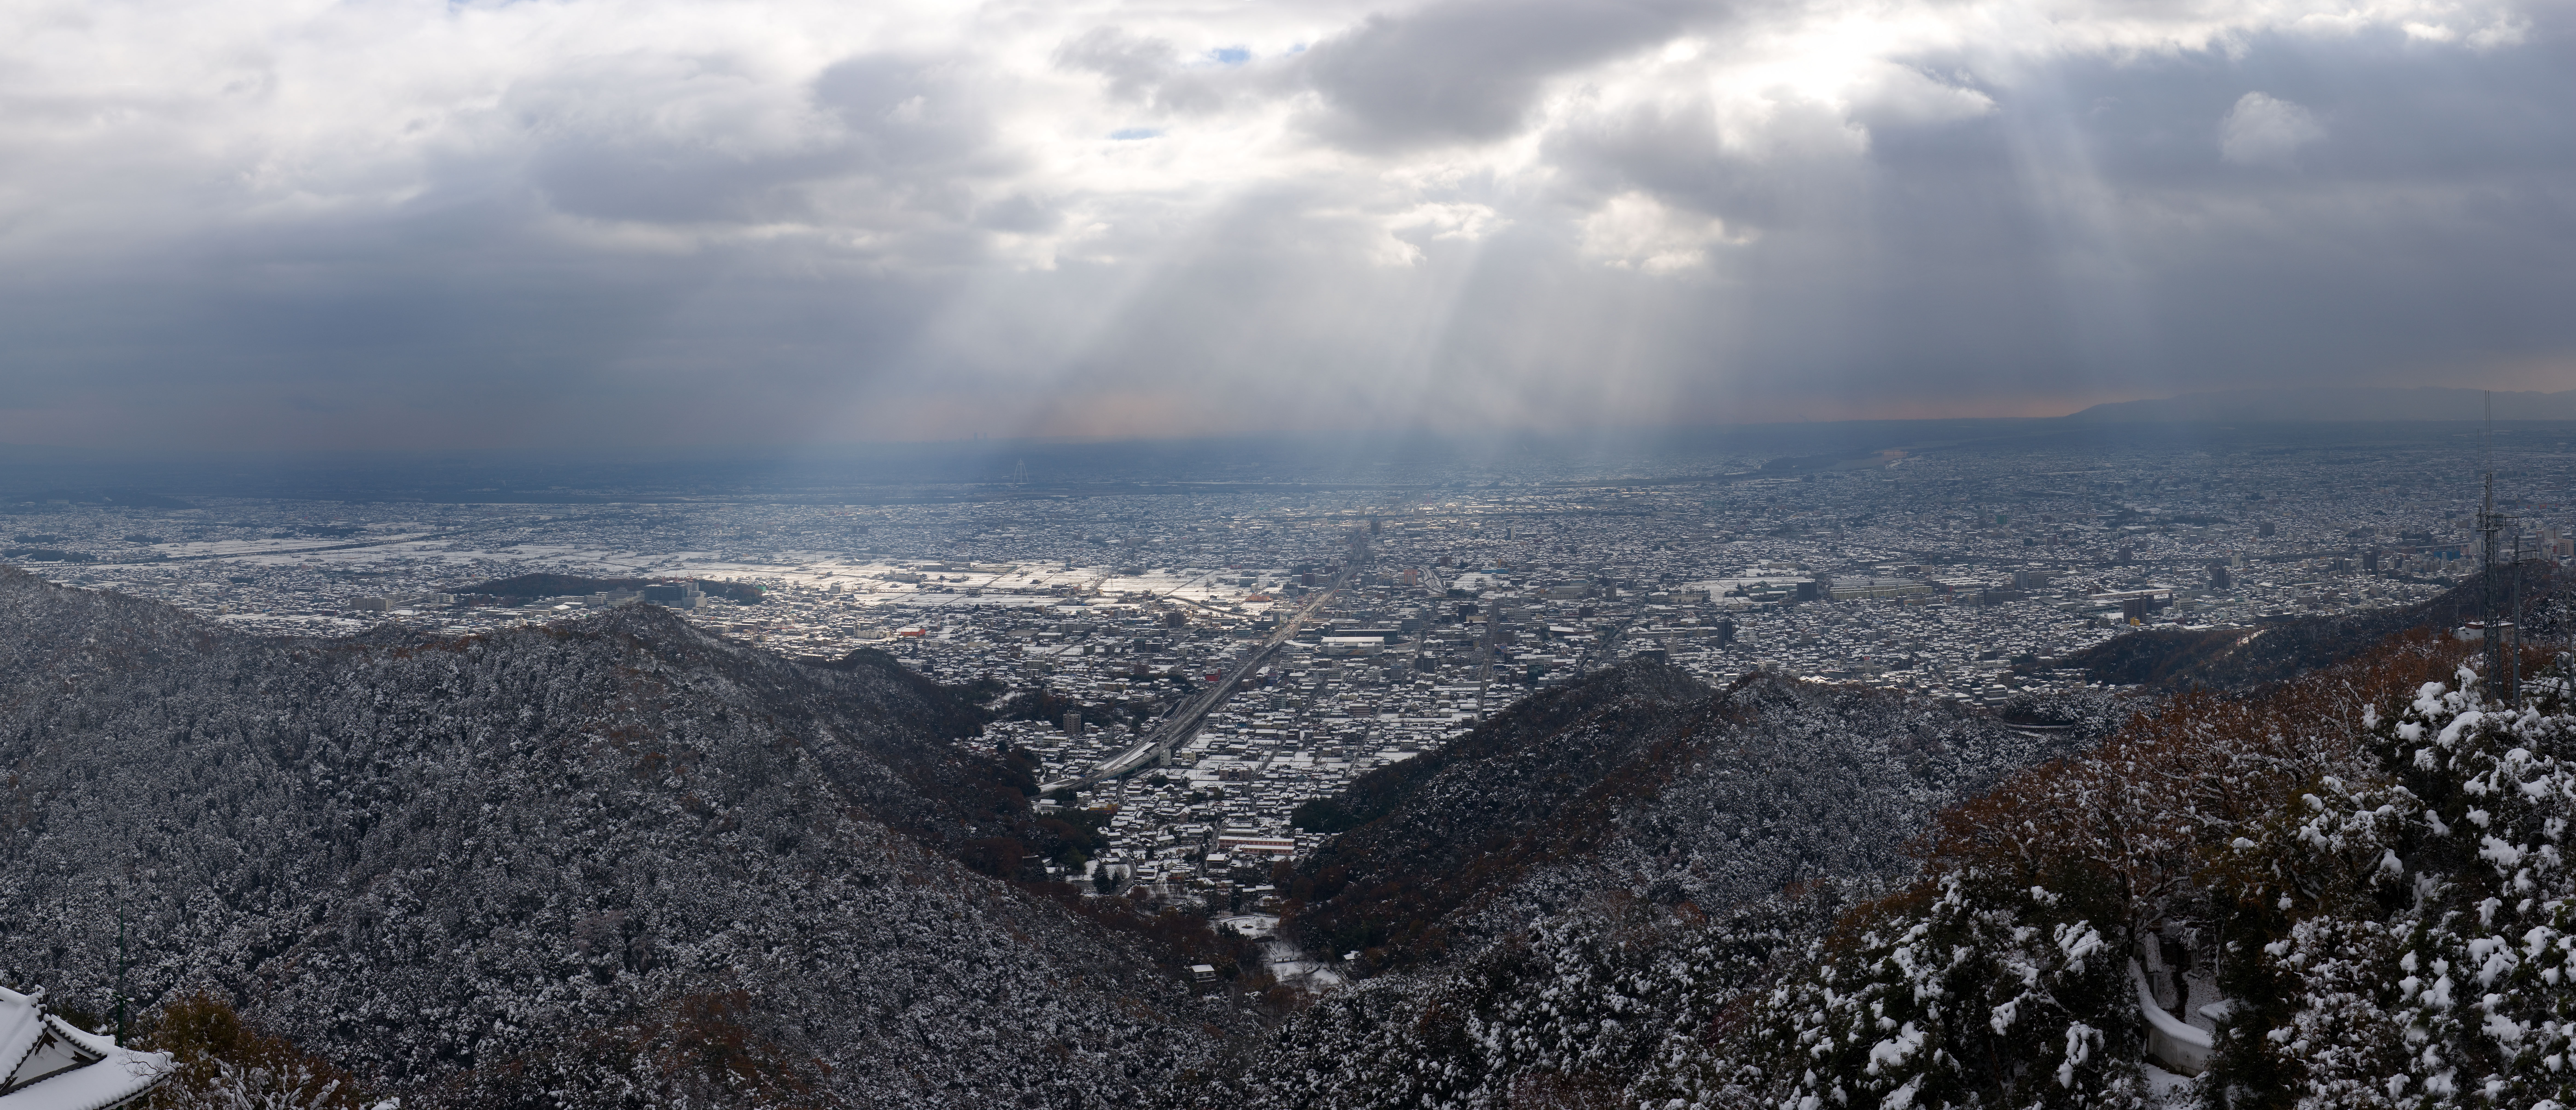 photo,material,free,landscape,picture,stock photo,Creative Commons,A panorama of Gifu, It is snowy, The NagarRiver, Gifu, town